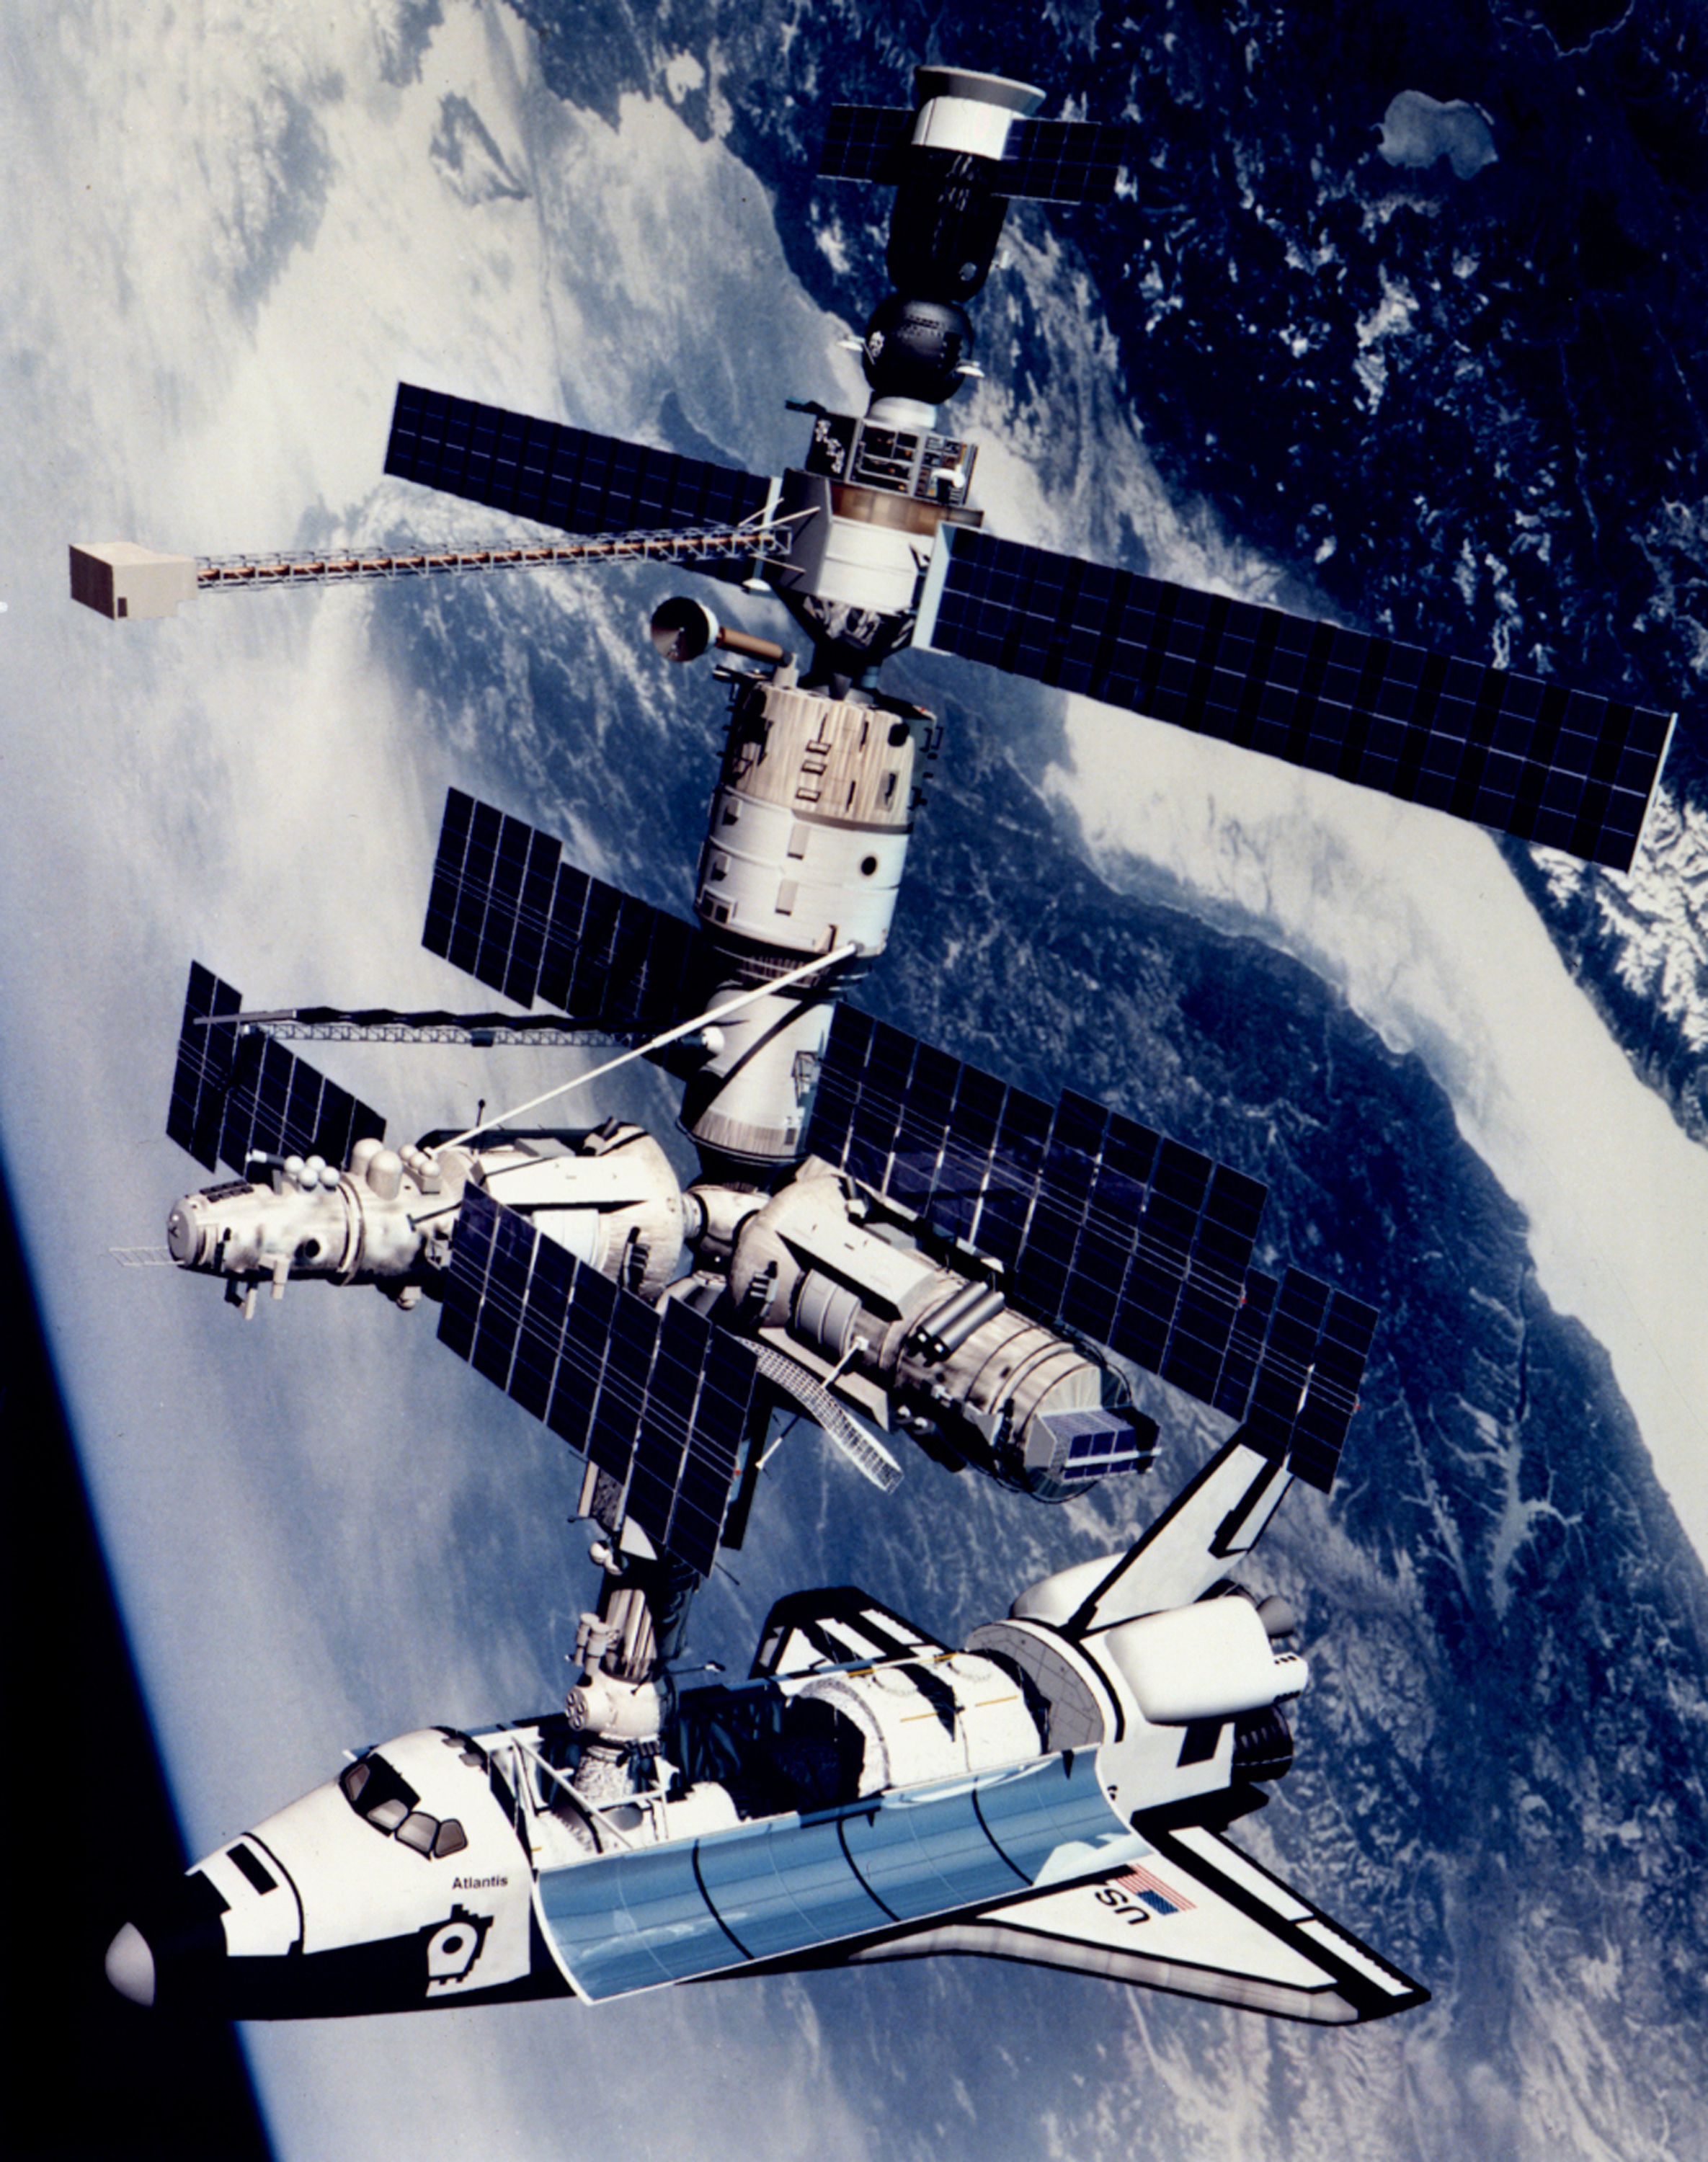 Technical rendition of STS-71 docked to Mir